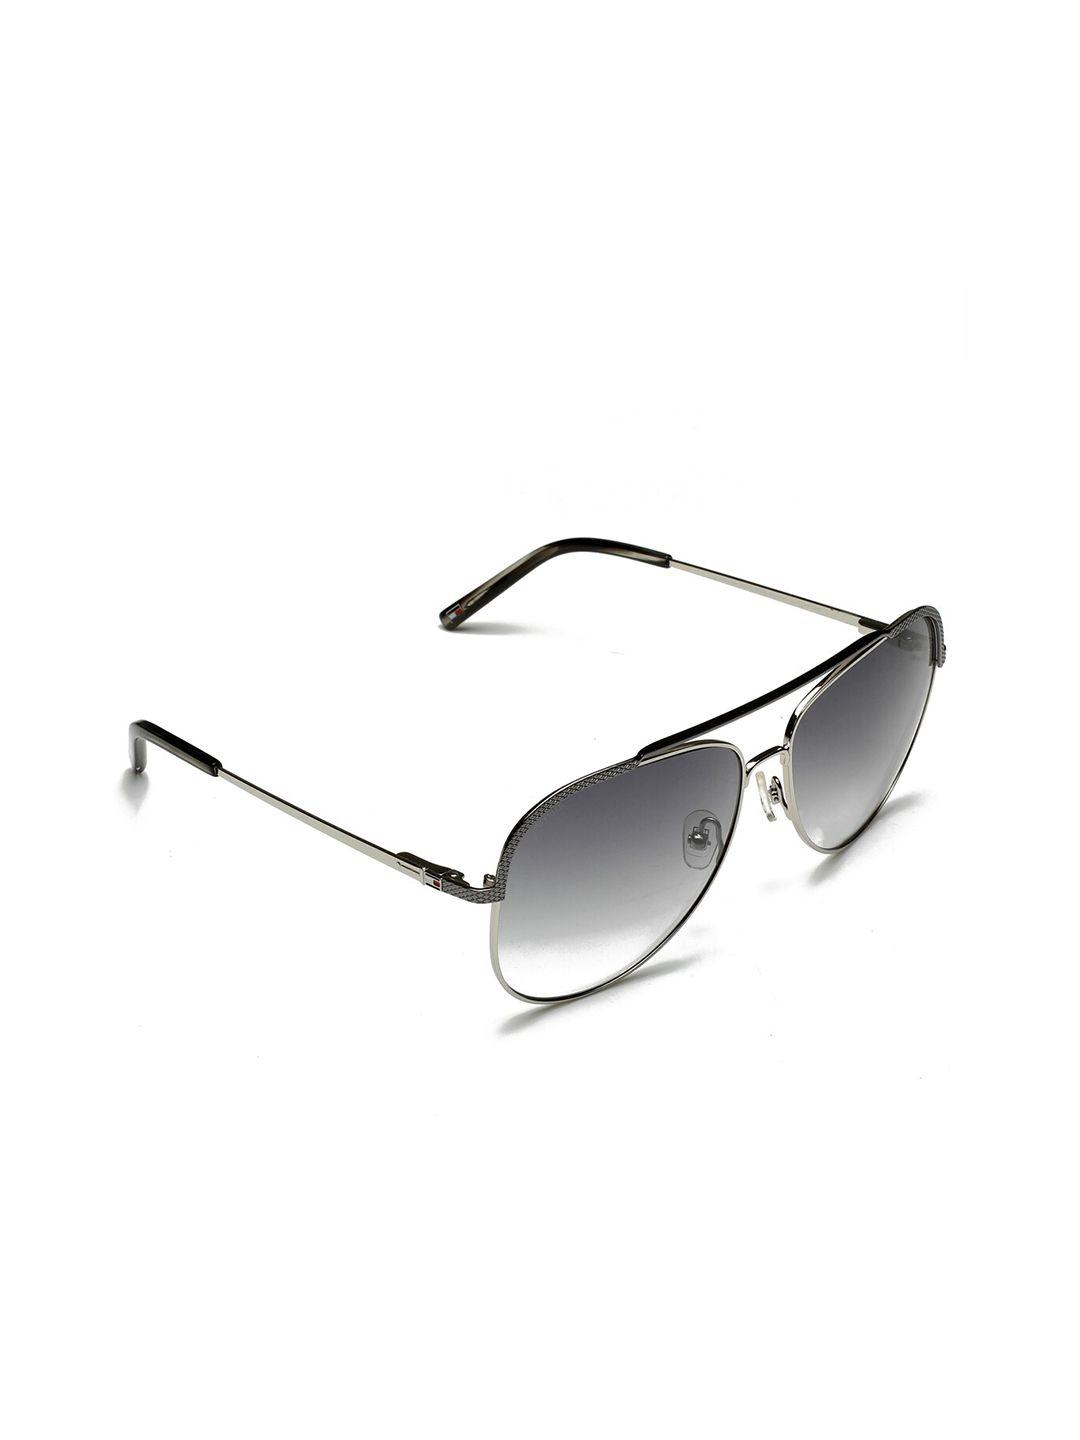 tommy hilfiger men aviator sunglasses with uv protected lens 9719 c4 d gun silver 60 s